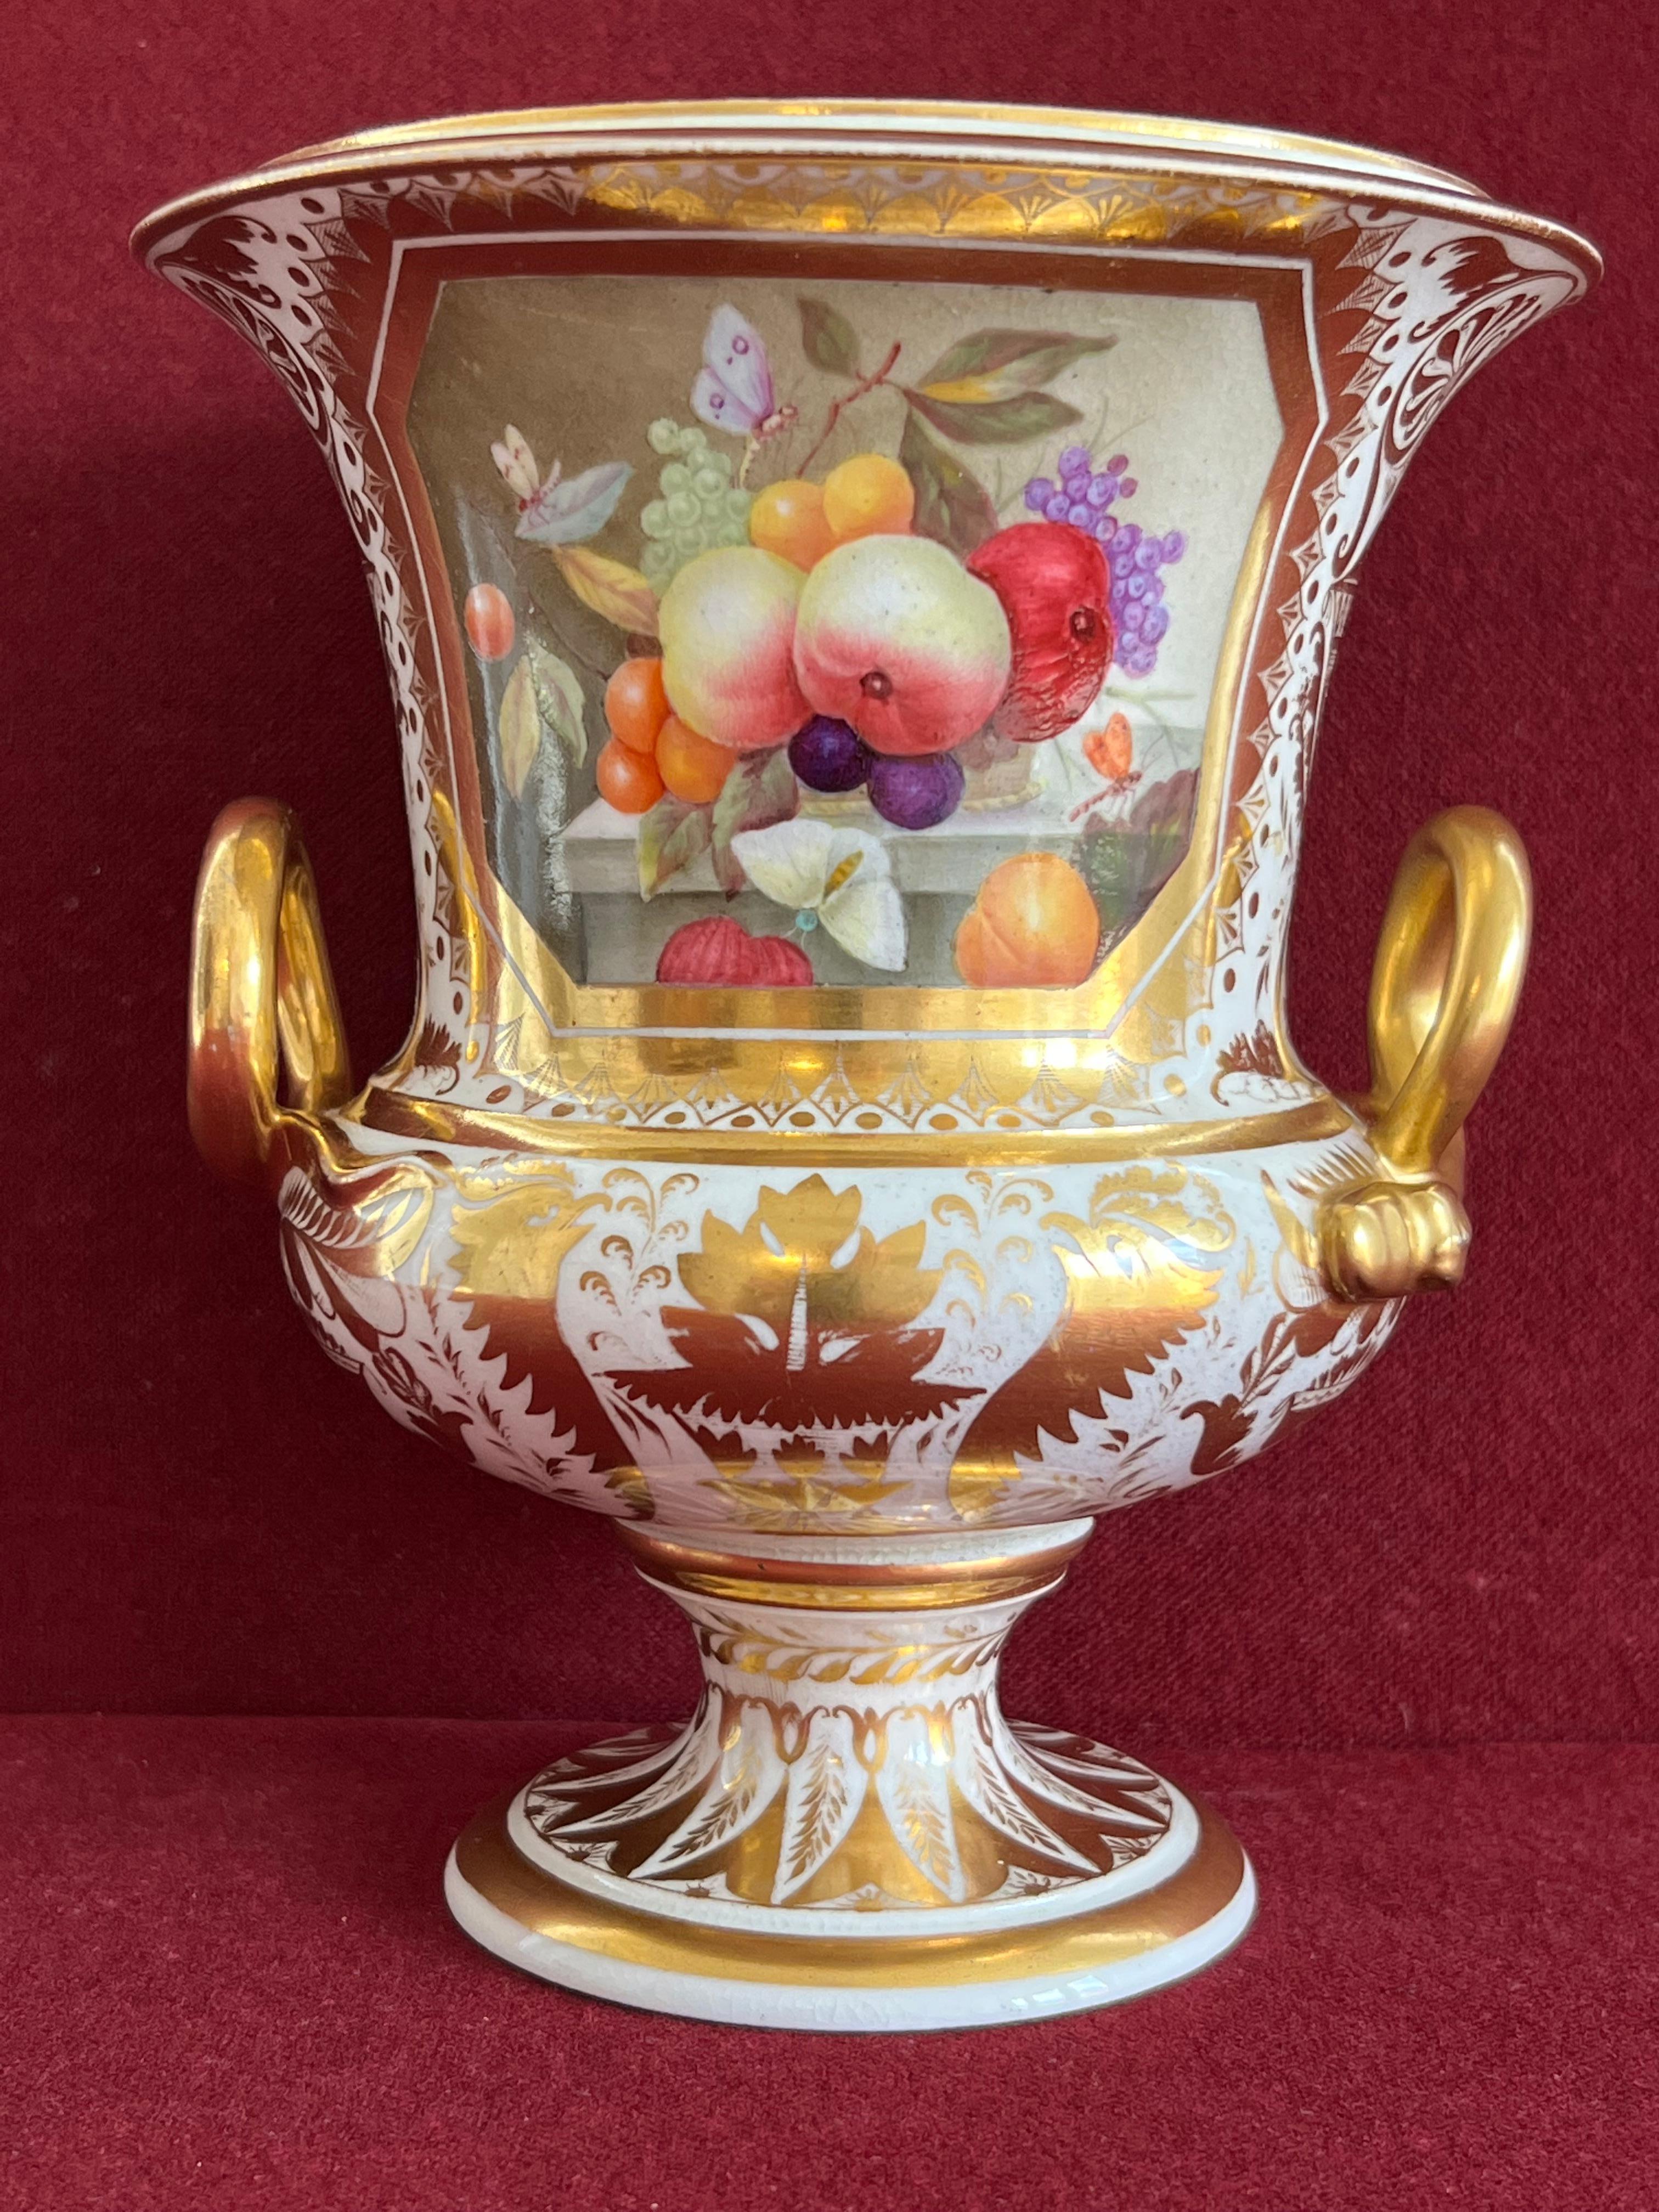 A very fine Derby porcelain campana shaped vase c.1815. Beautifully painted with two panels of fruit in the manner of Thomas Steele. This artist was one of the most talented and significant Derby artists. Two gilded snake handles adorn either side